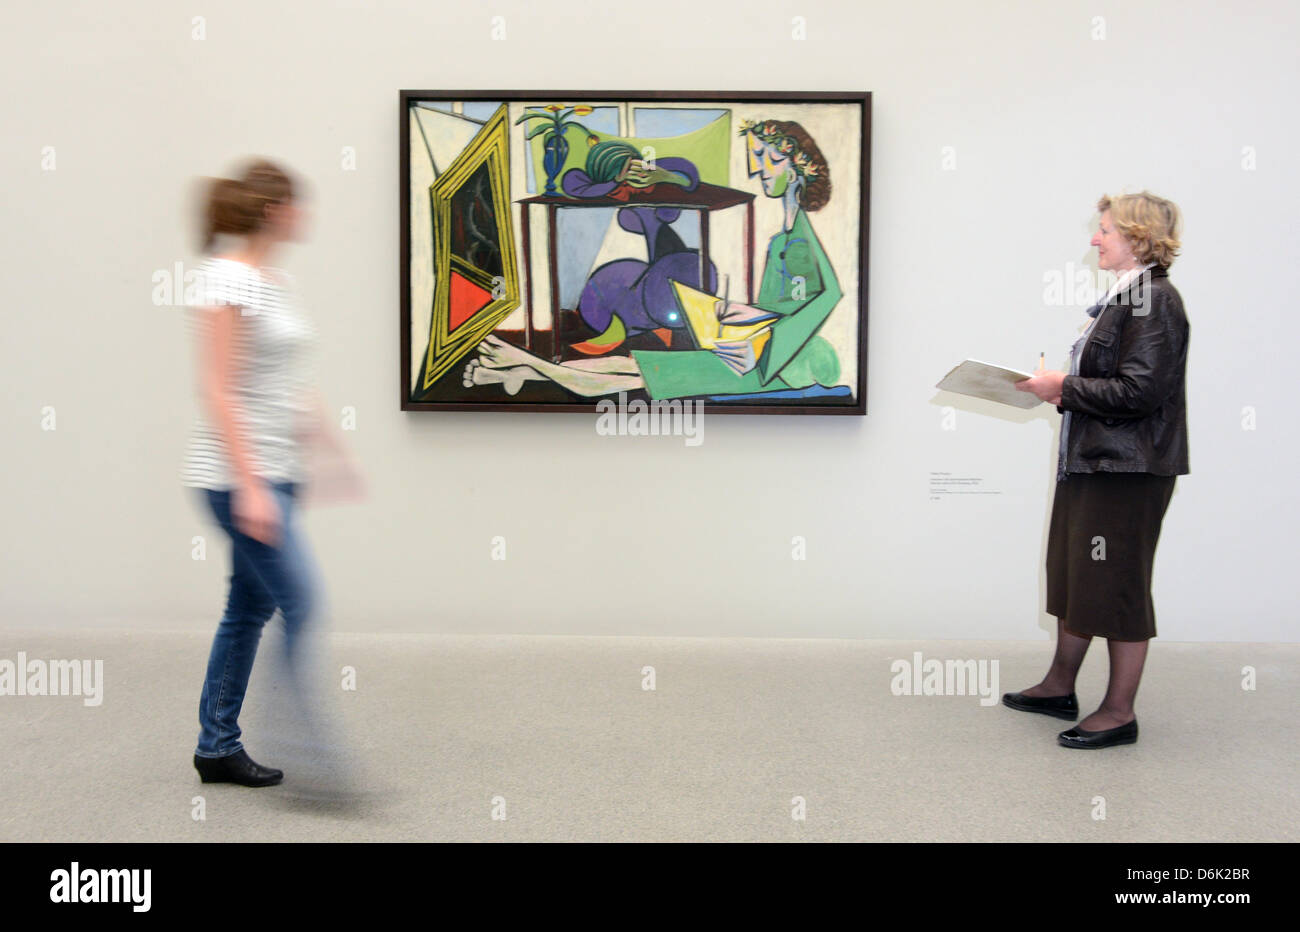 Visitors Look On Works Us Artist Editorial Stock Photo - Stock Image